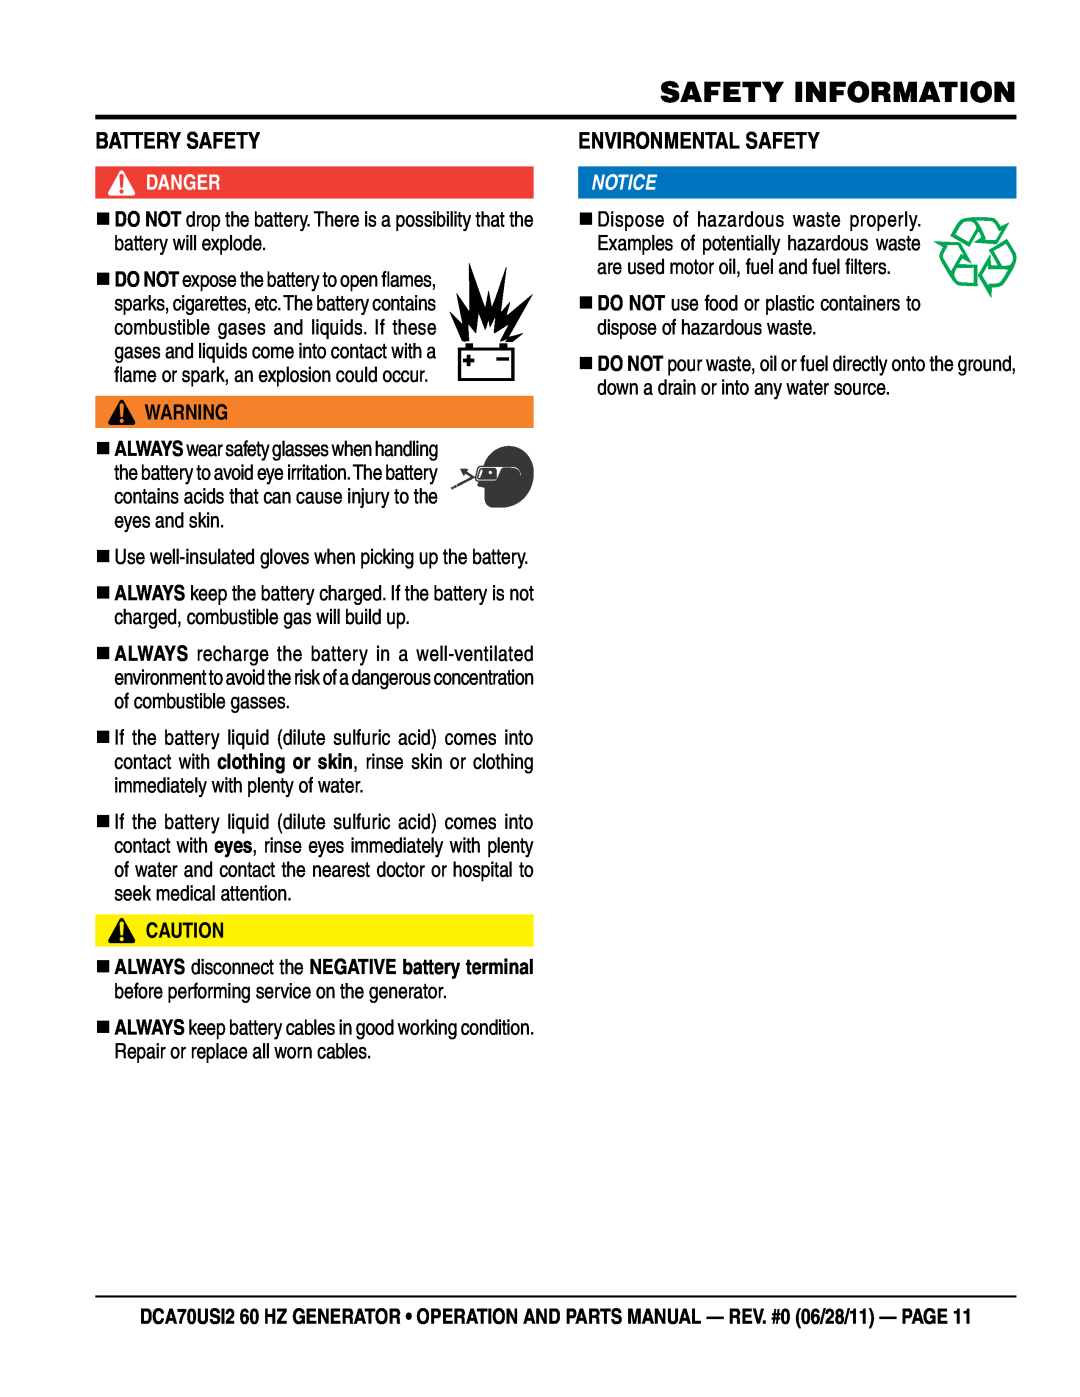 Multiquip DCA70USI2 manual BaTTerY SaFeTY, envIronmenTal SaFeTY, Safety Information, Danger 